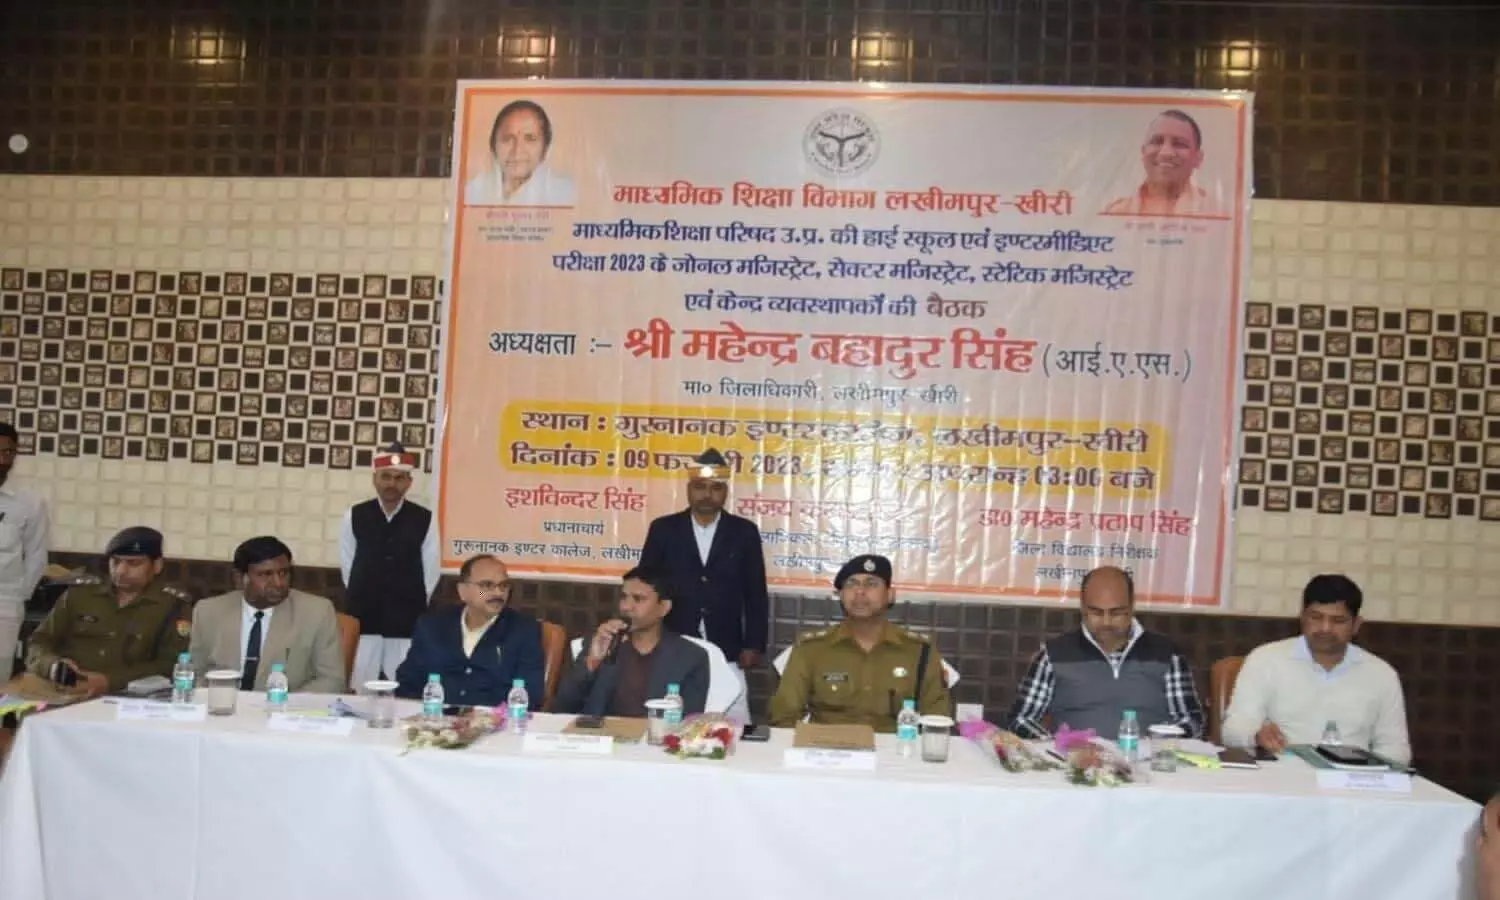 UP Board Exam will be held at 141 centers in Lakhimpur Kheri, strong security arrangements